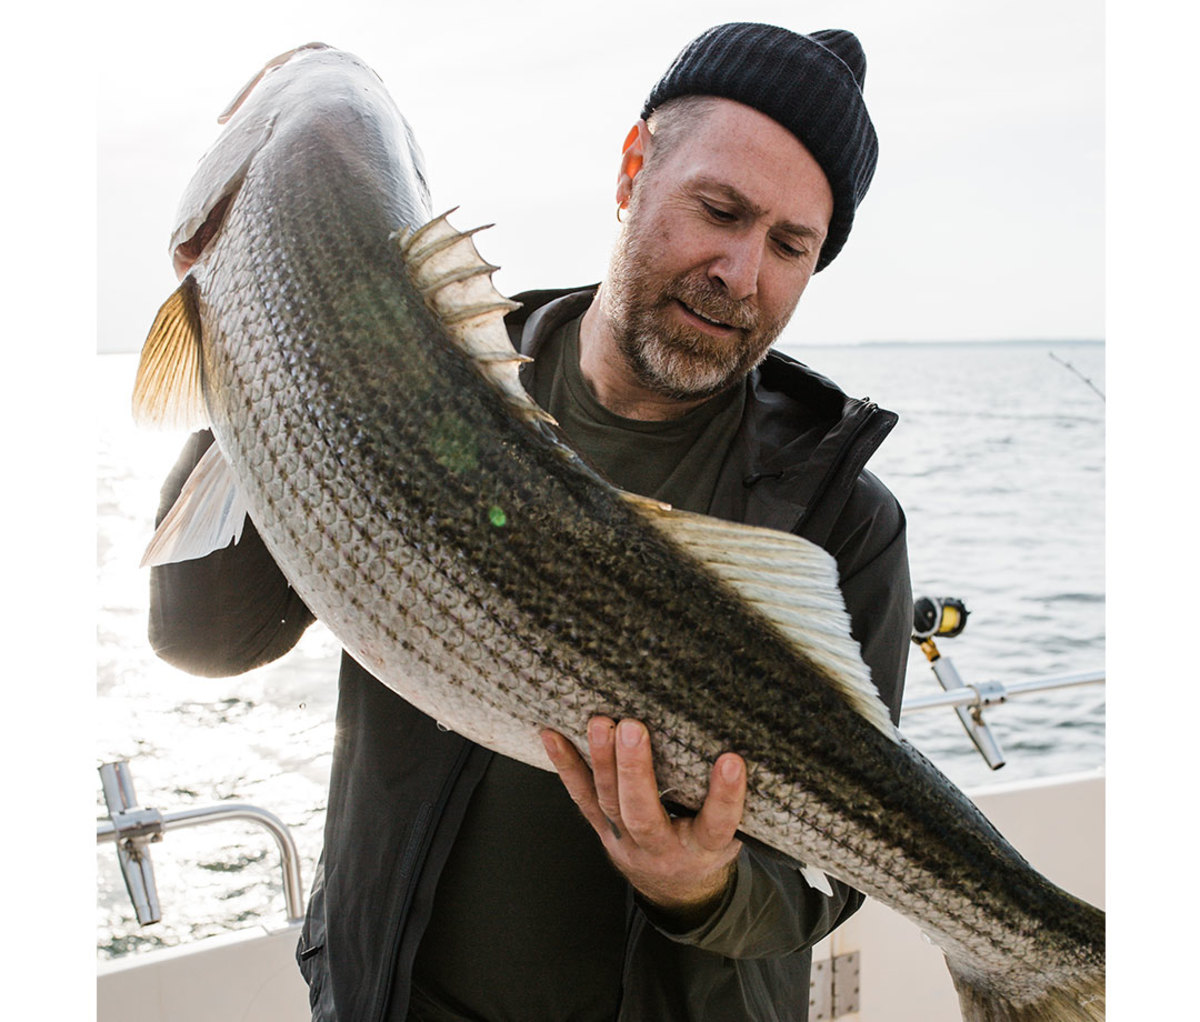 Claes Claesson holds 44-inch striped bass